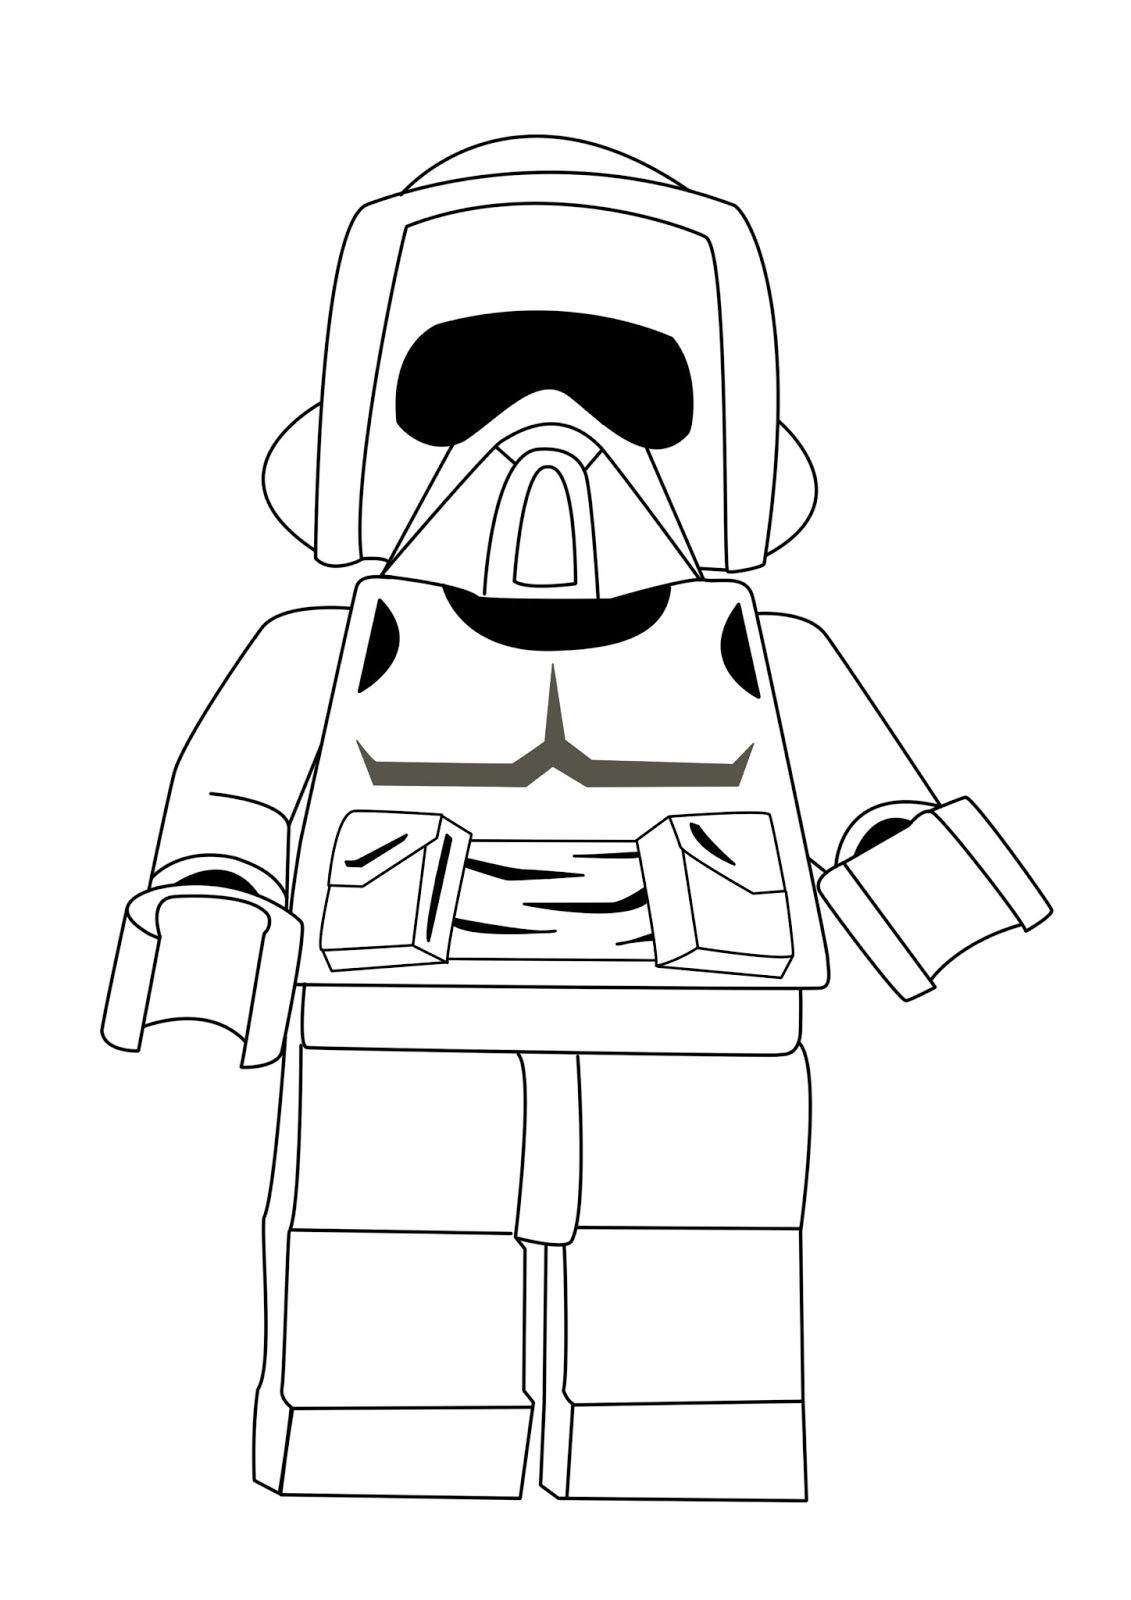 Lego Coloring Pages Star Wars Lego Star Wars Coloring Pages Best Coloring Pages For Kids